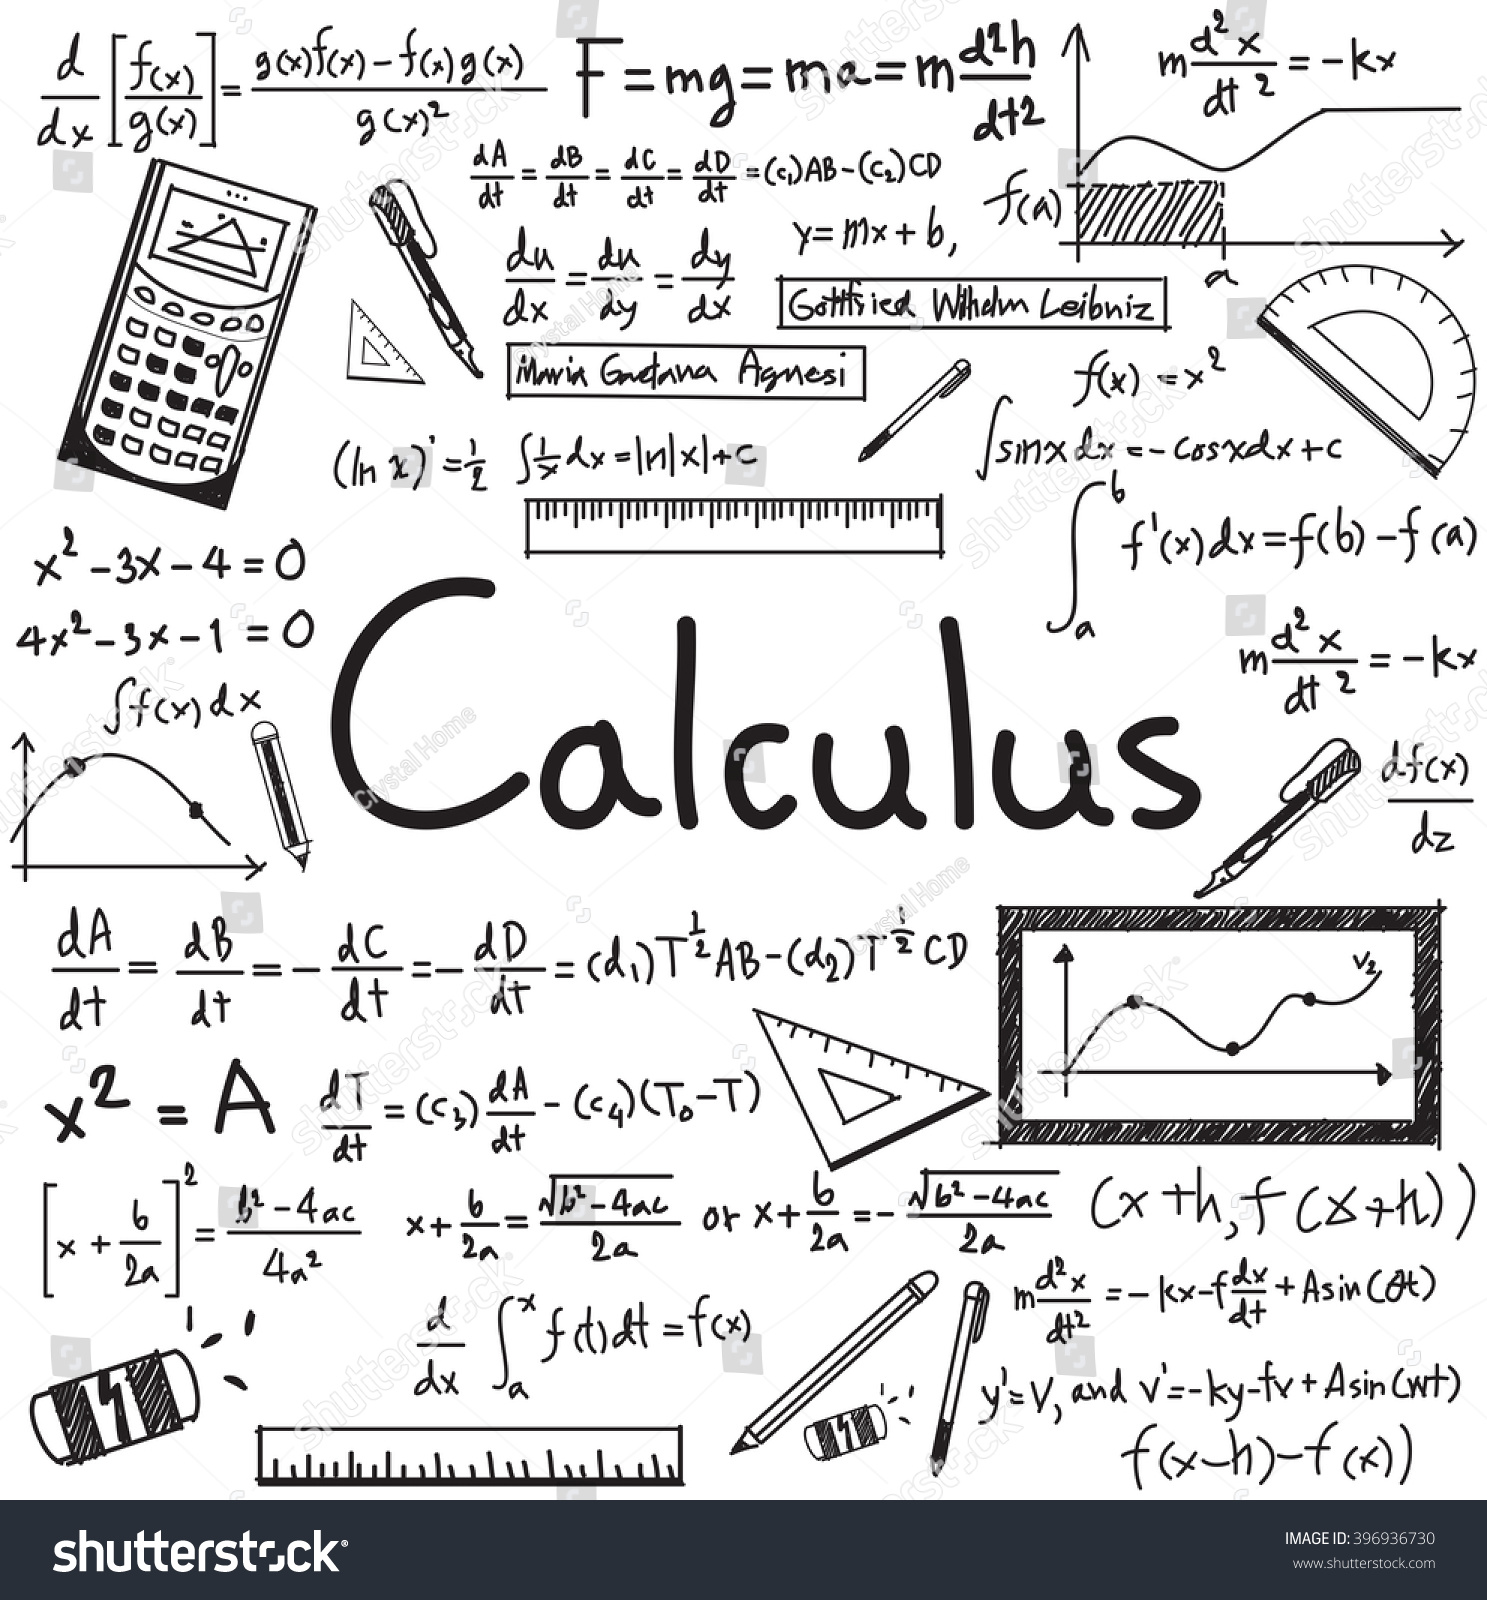 Calculus Law Theory Mathematical Formula Equation Stock Vector (Royalty